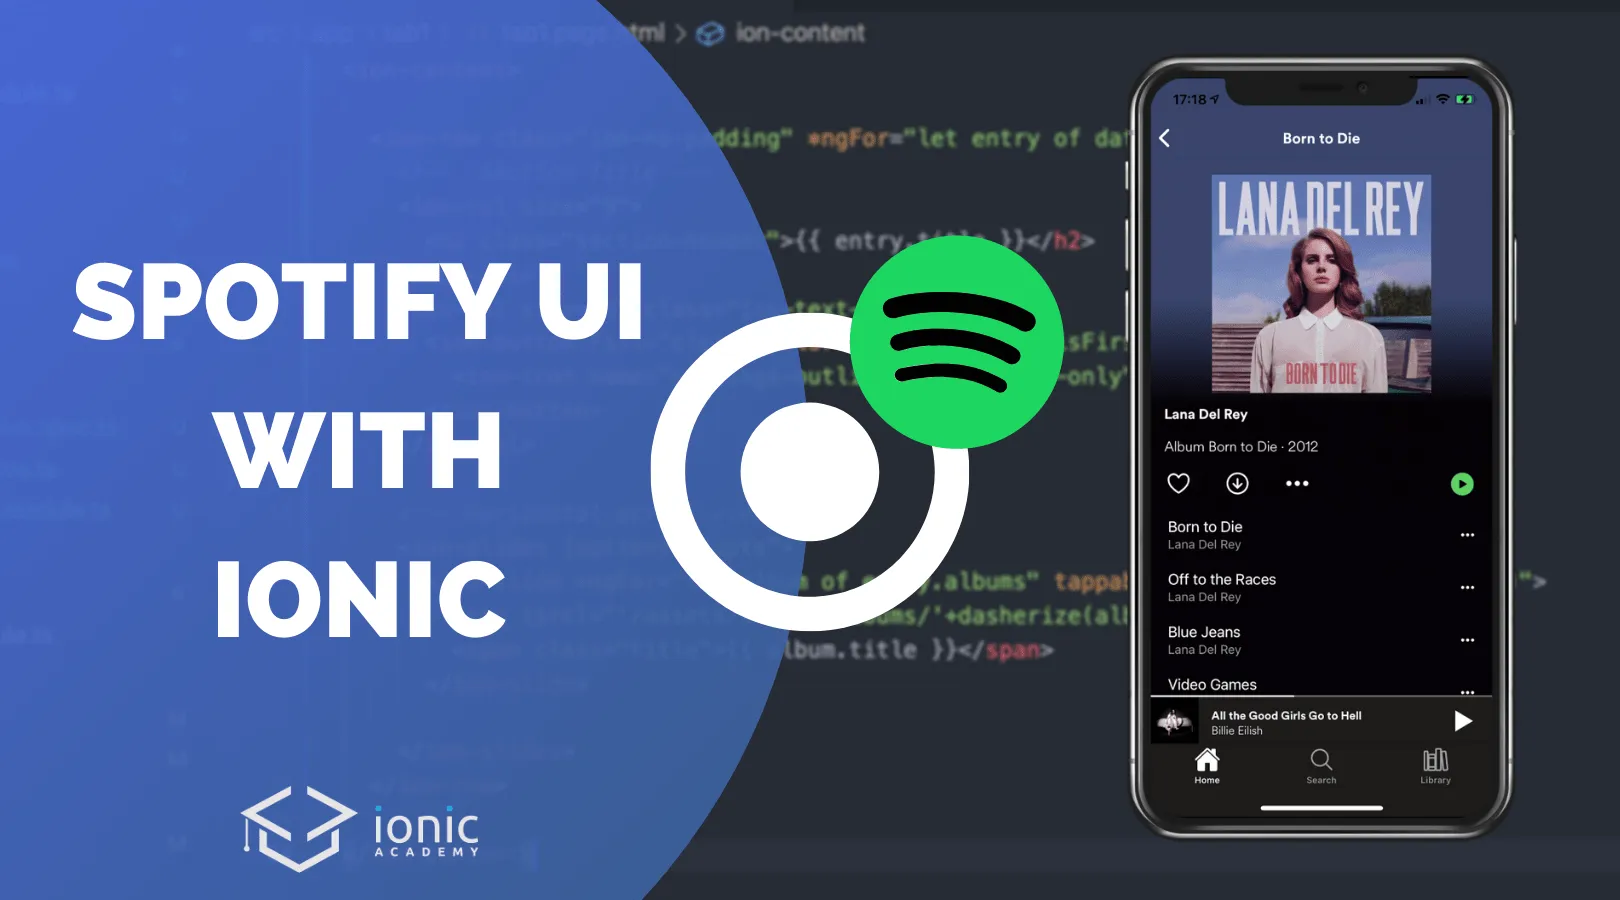 Building the Spotify UI with Ionic